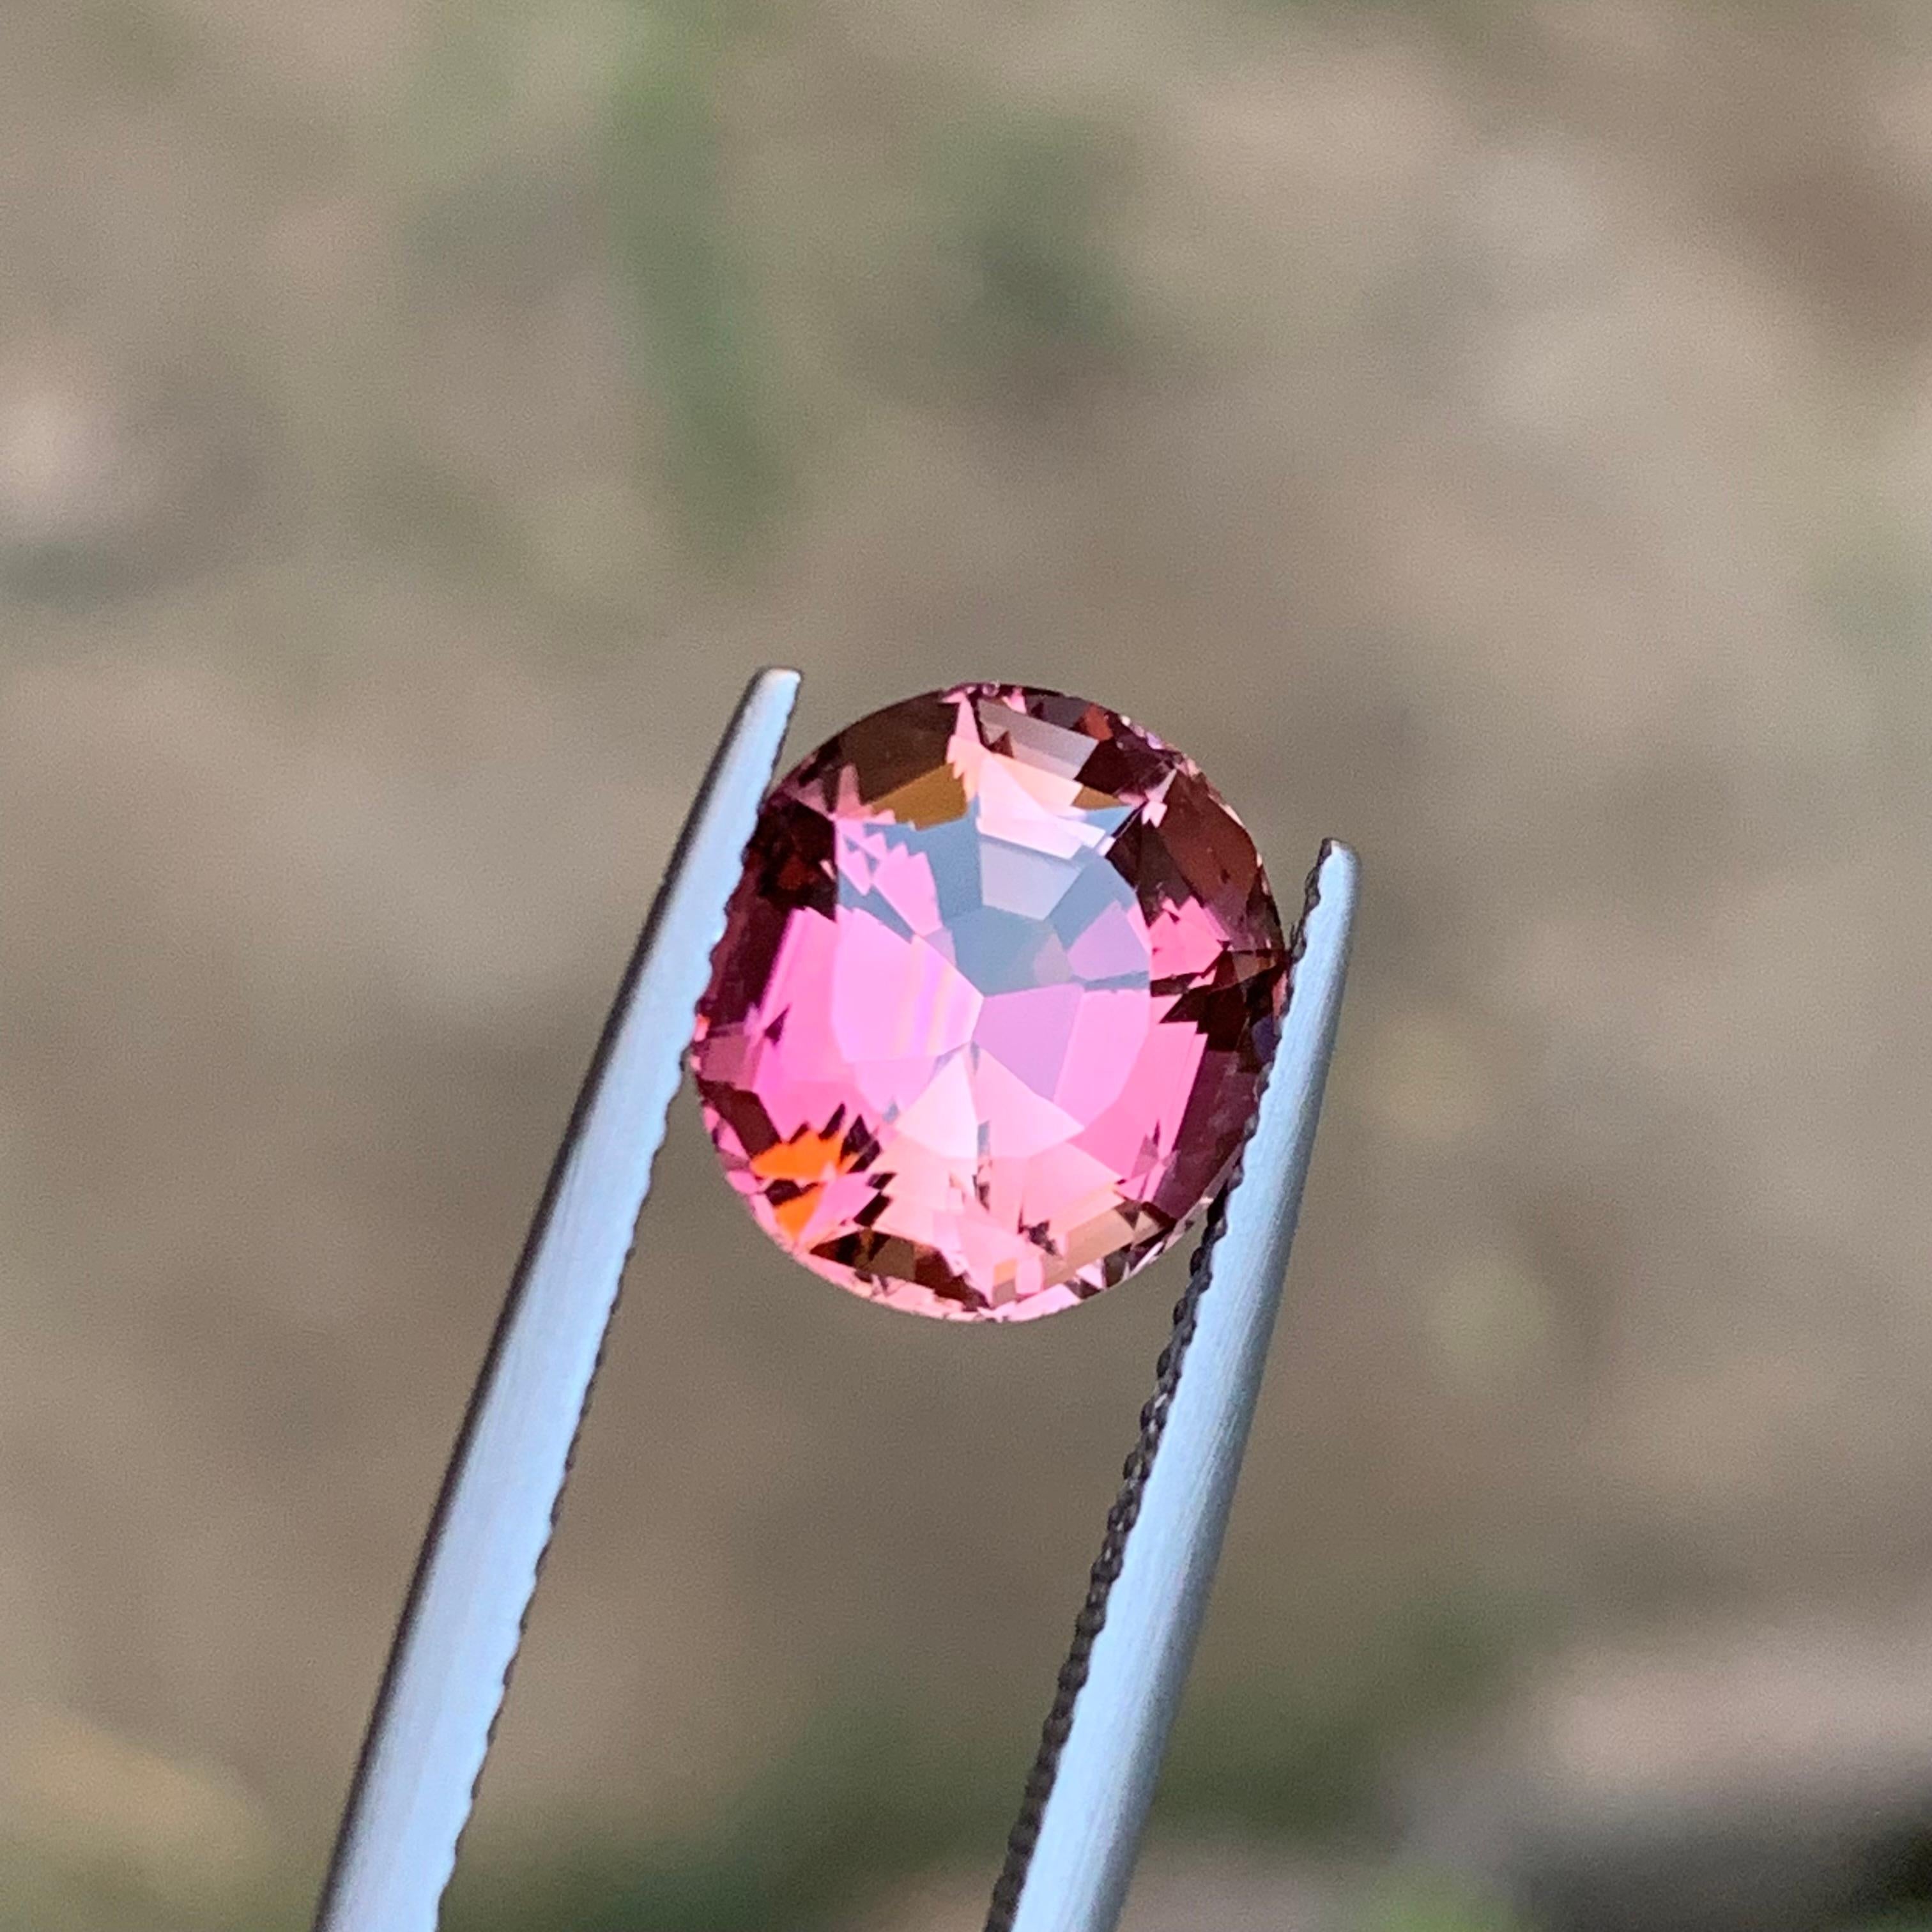 Rare Peachy Pink Natural Tourmaline Gemstone, 3.80 Ct Fancy Cushion Cut for Ring For Sale 5